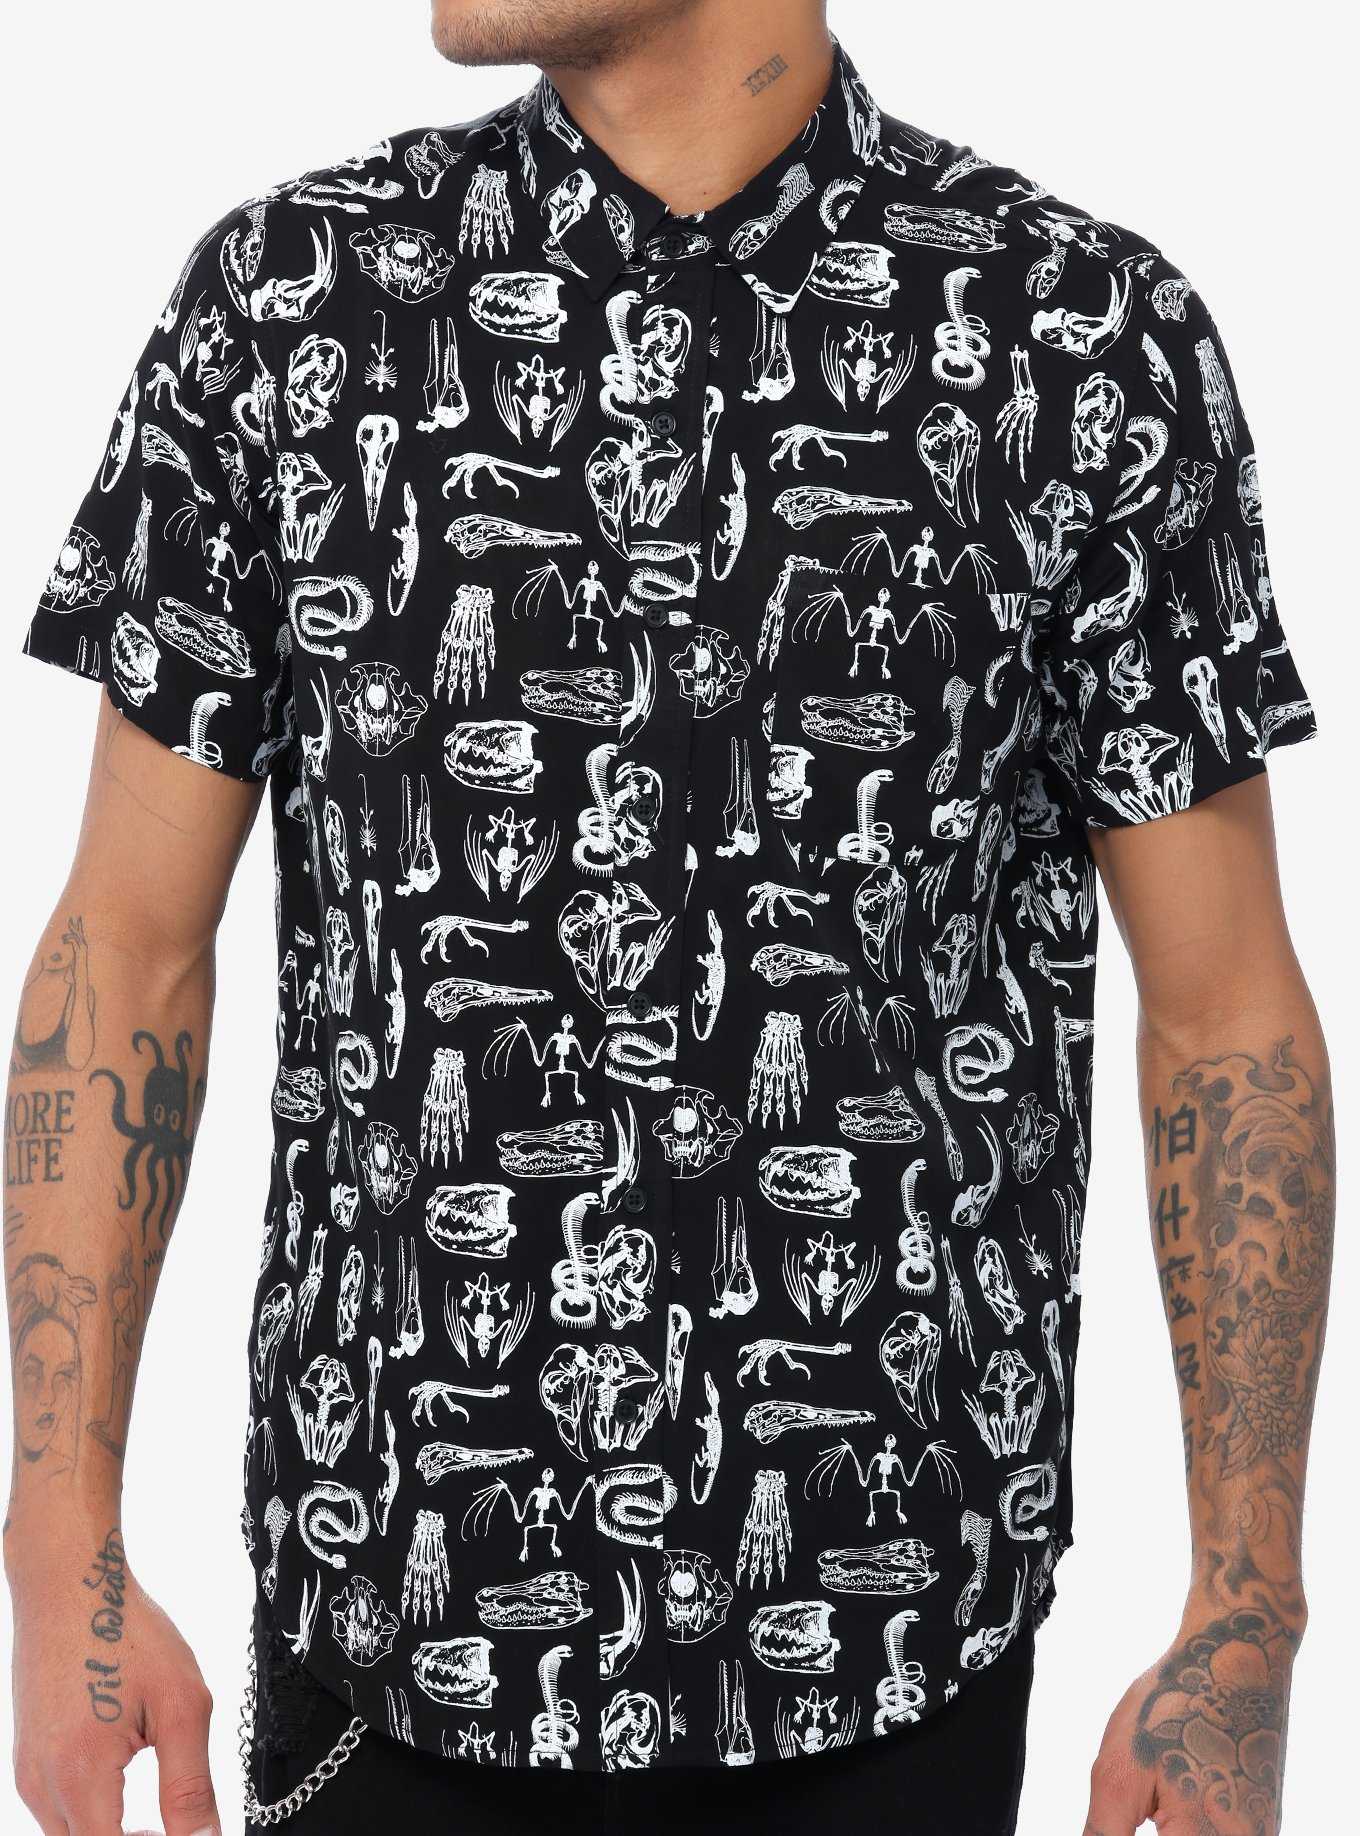 Creature Skeletons Woven Button-Up, , hi-res